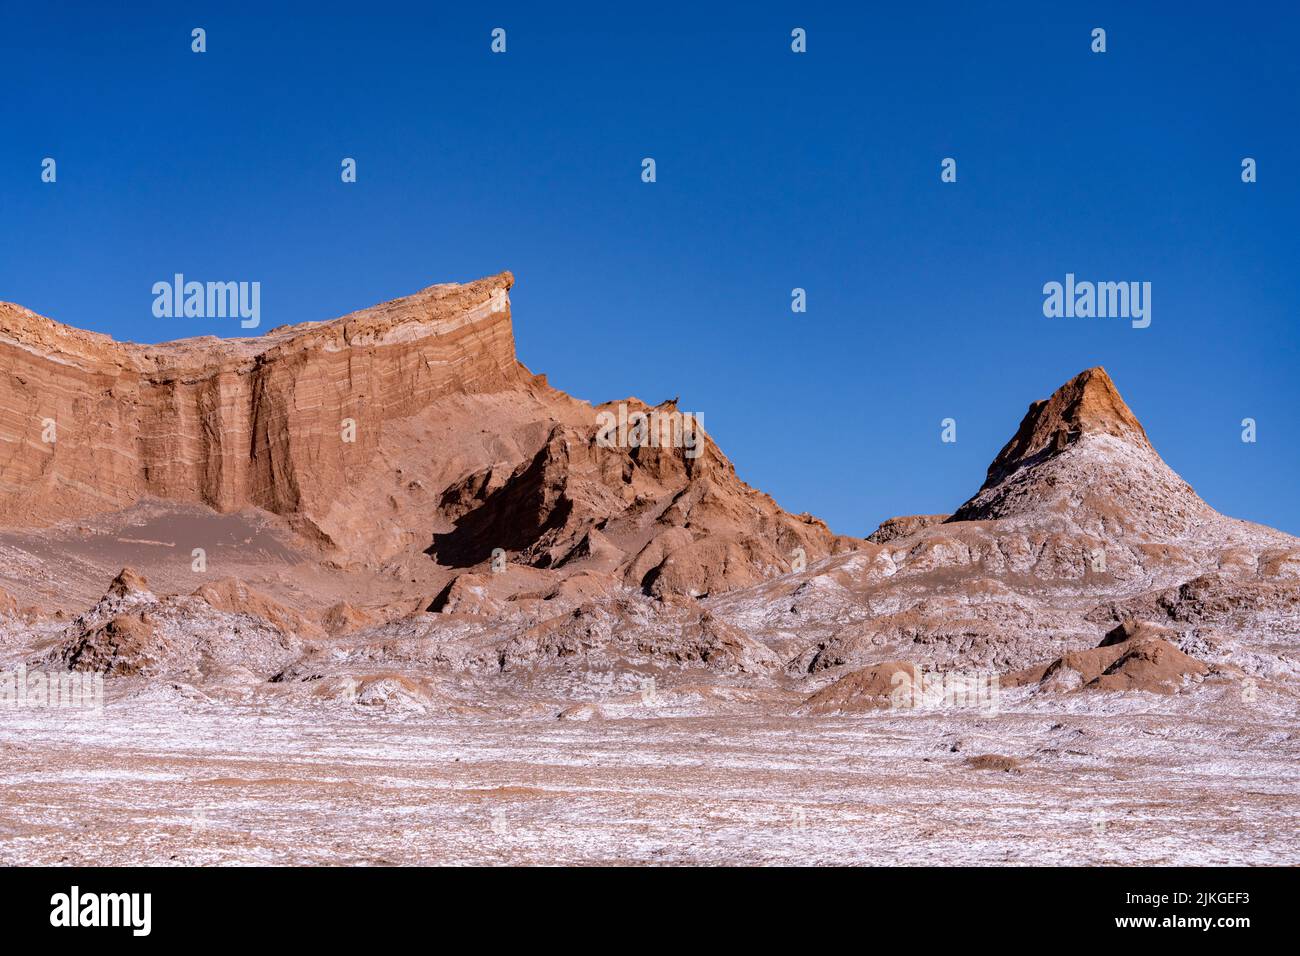 Salt deposits and siltstone rock formations in the Valley of the Moon or Valle de Luna near San Pedro de Atacama, Chile. Stock Photo